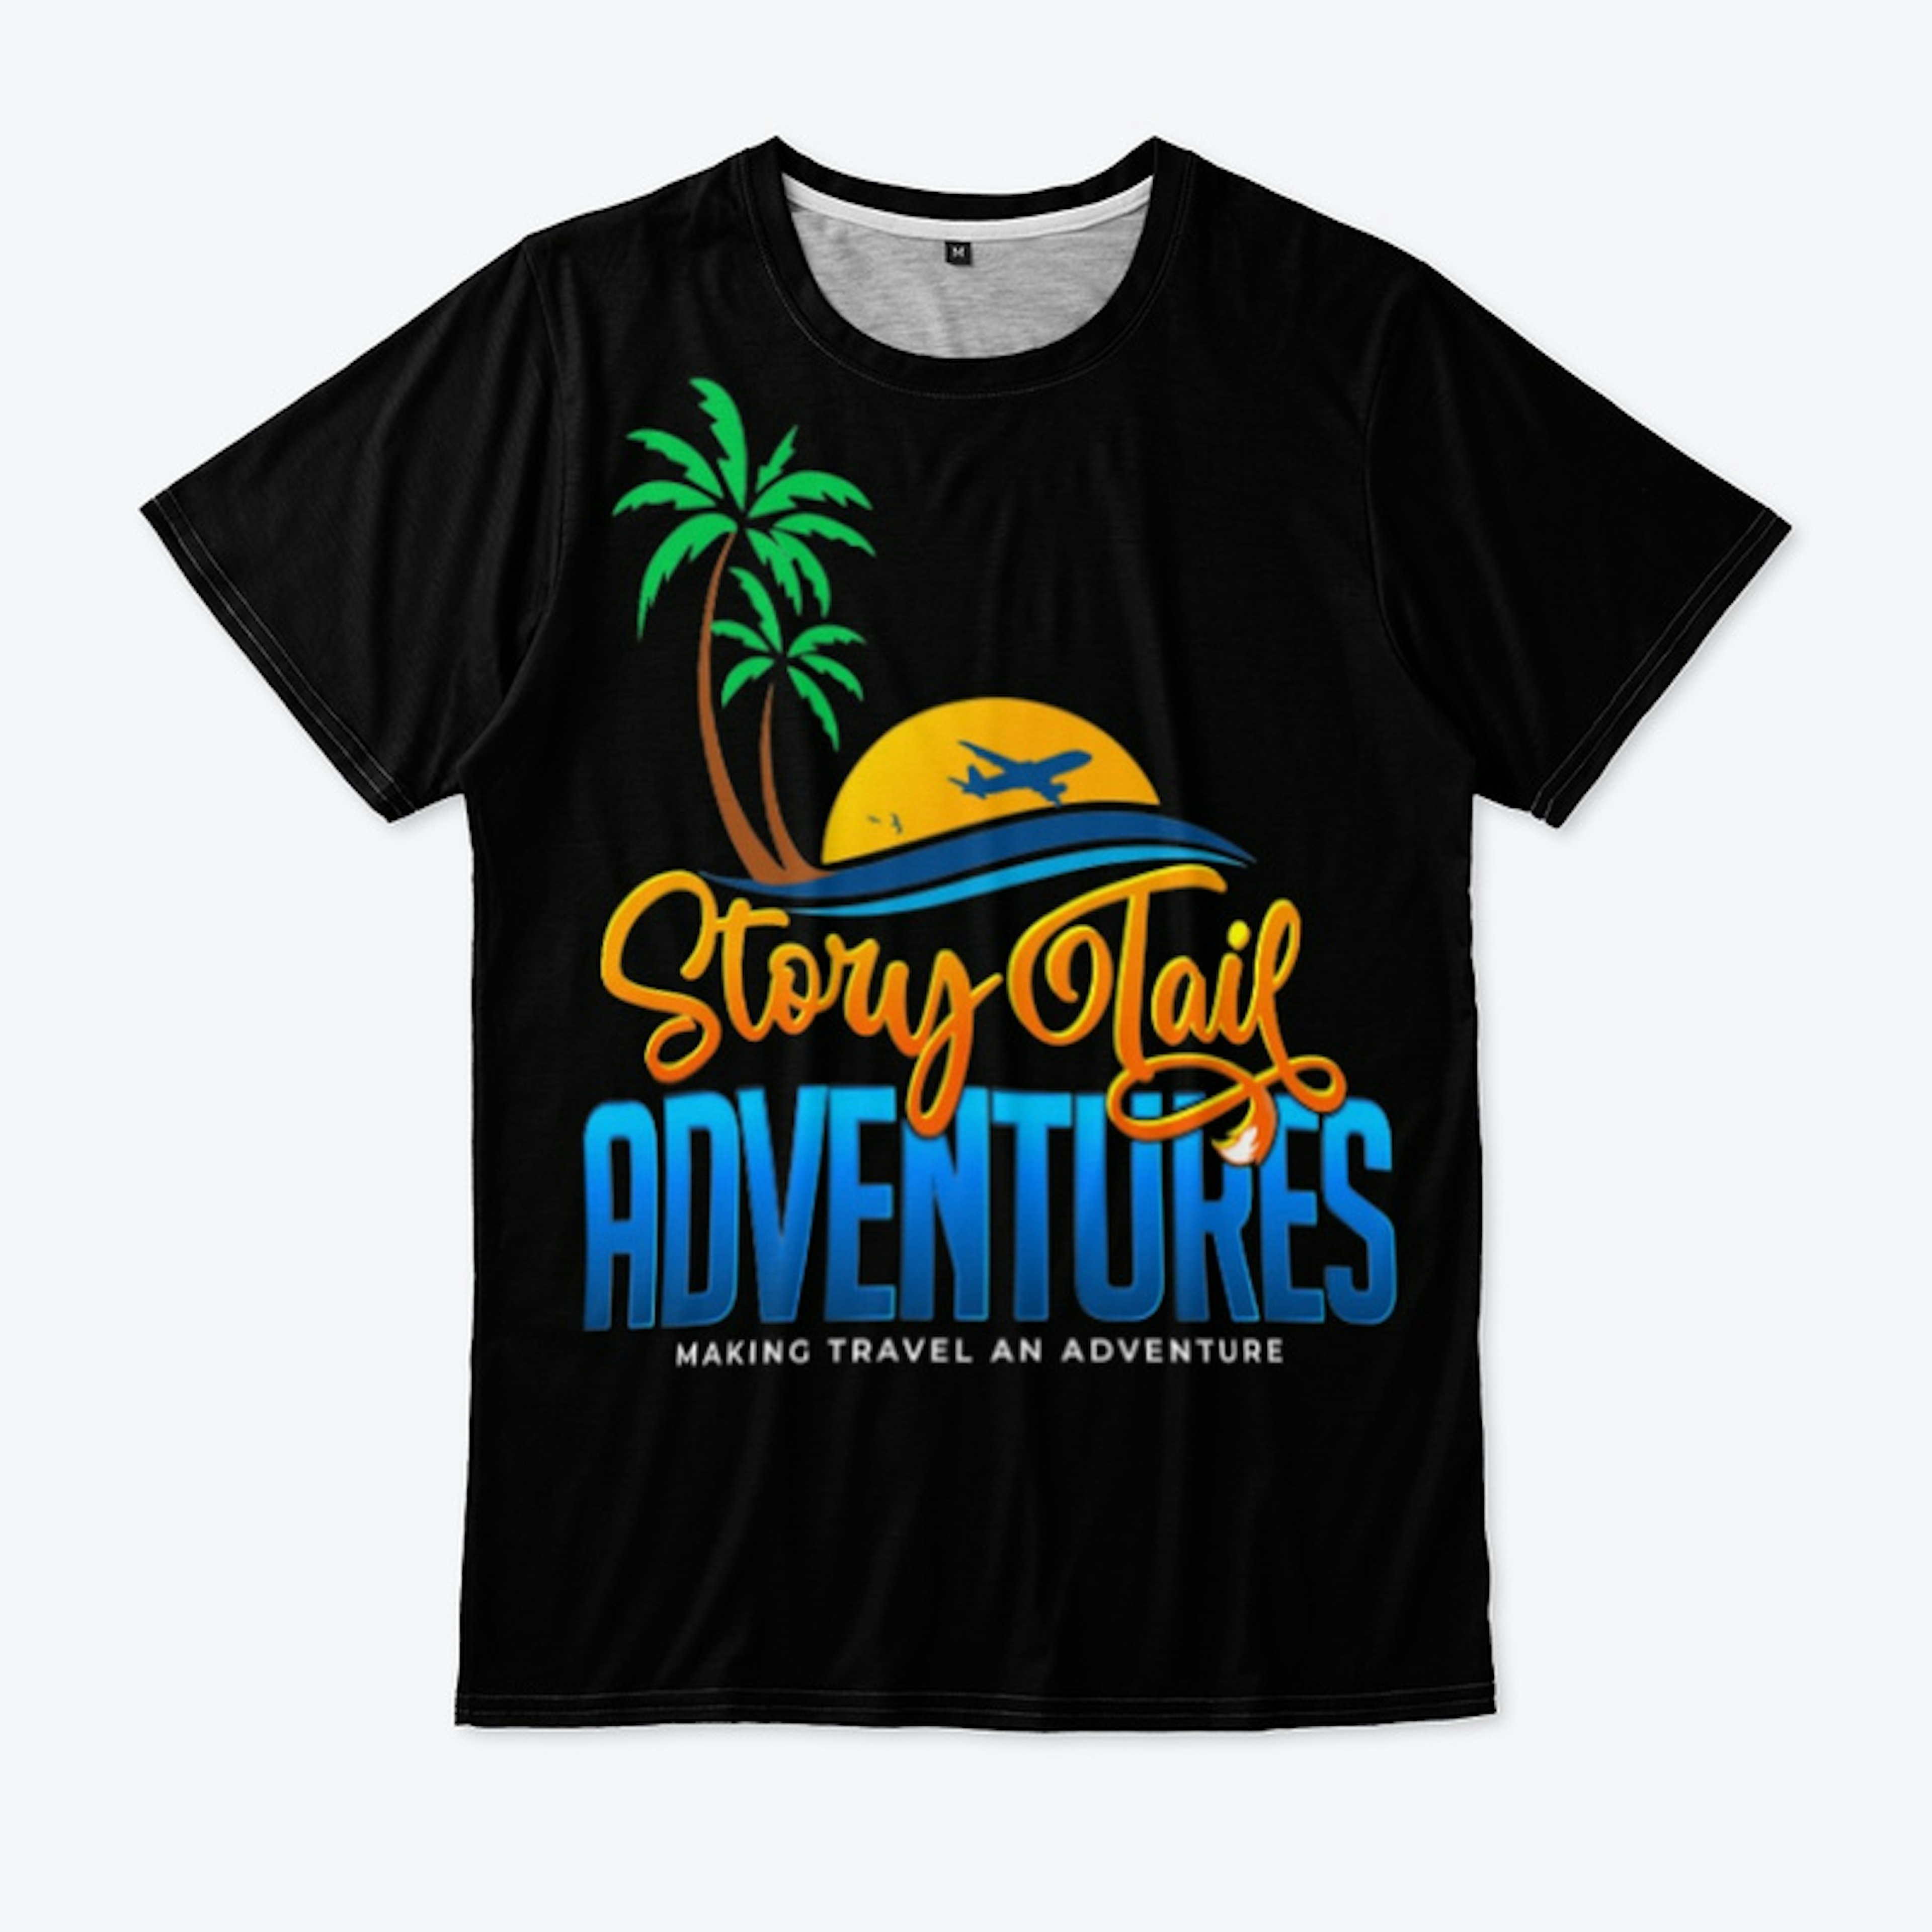 Story-Tail Adventures